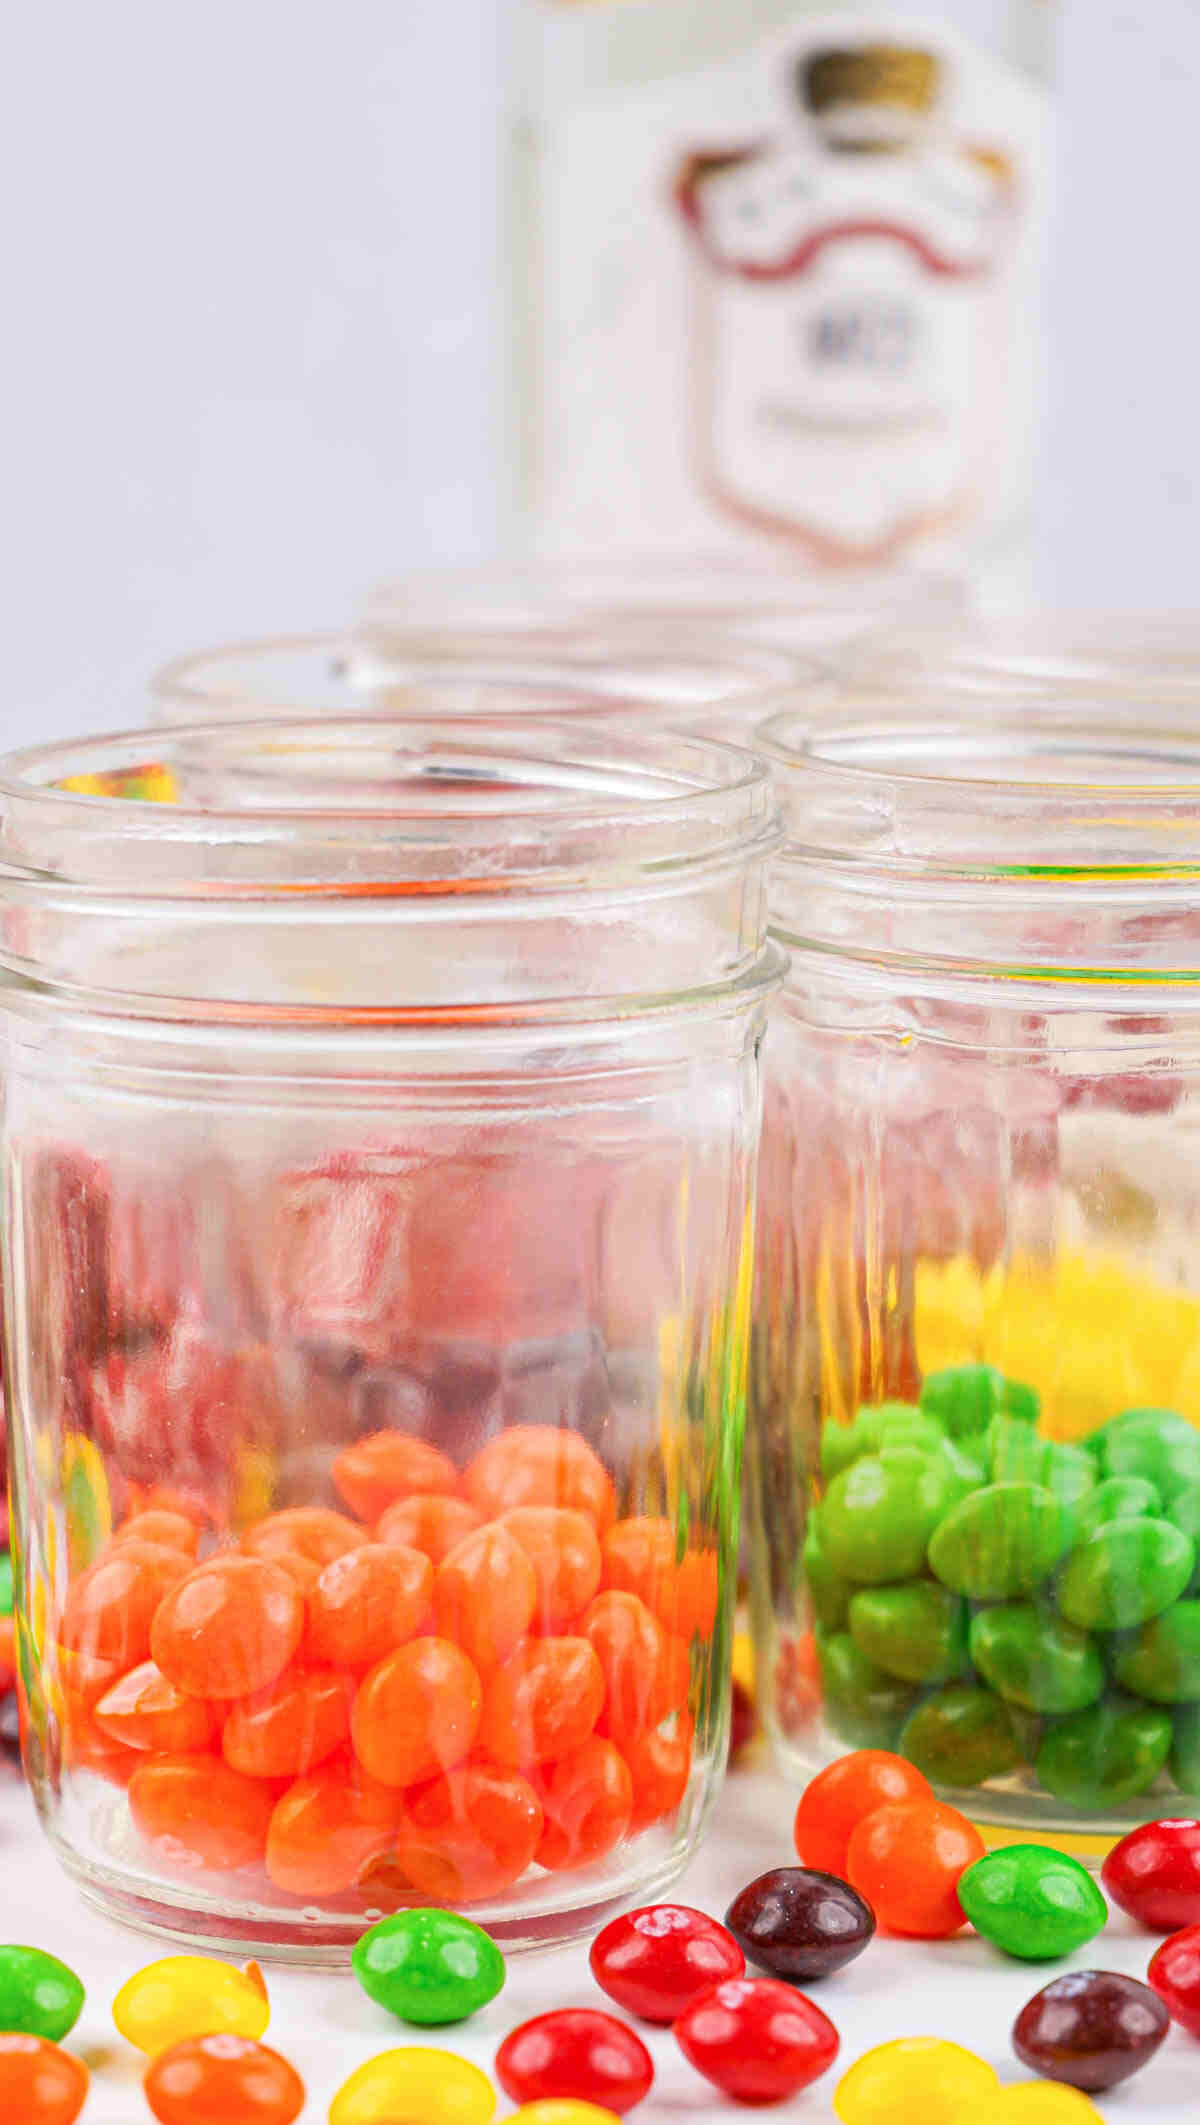 Skittles candy sorted by color and placed in glass jars